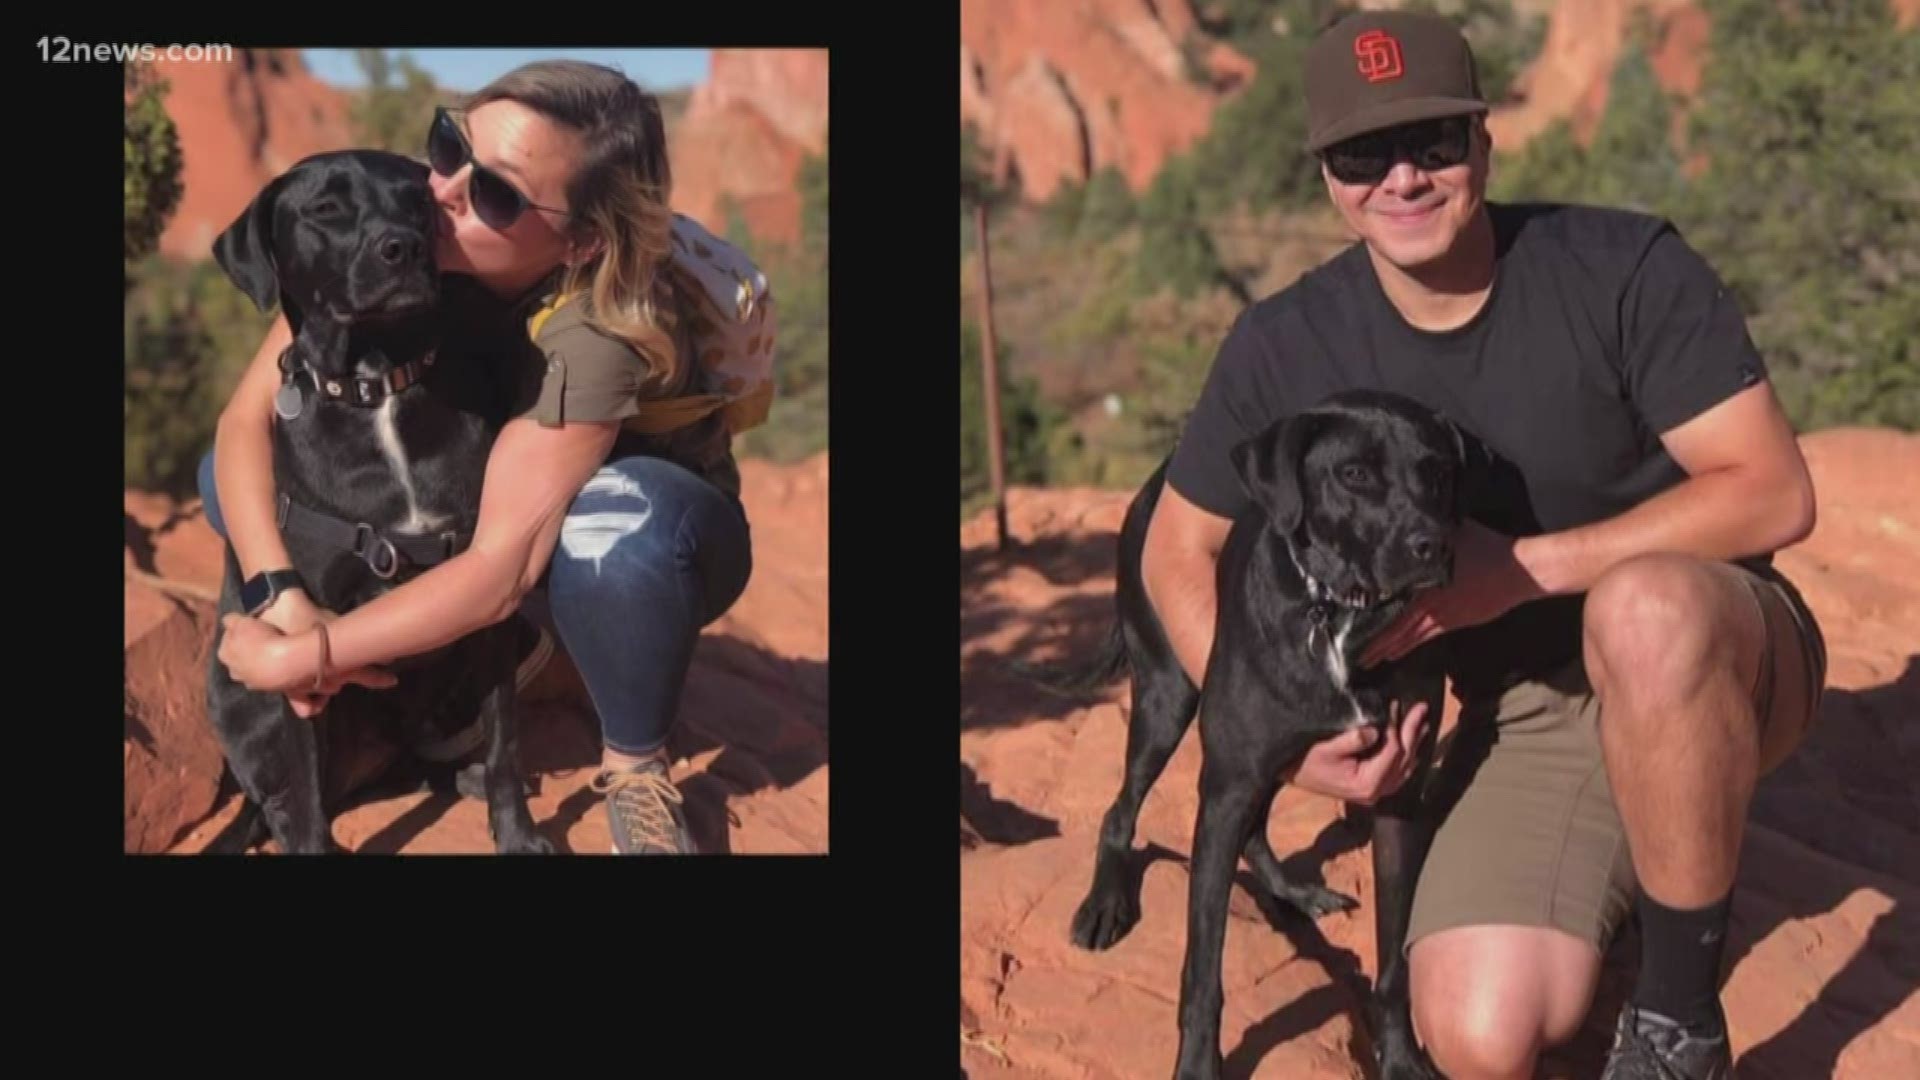 A San Diego couple on their way to the Grand Canyon were involved in a deadly head-on crash. Their dog, Obi, got loose. If spotted, call the Tuba City Humane Society